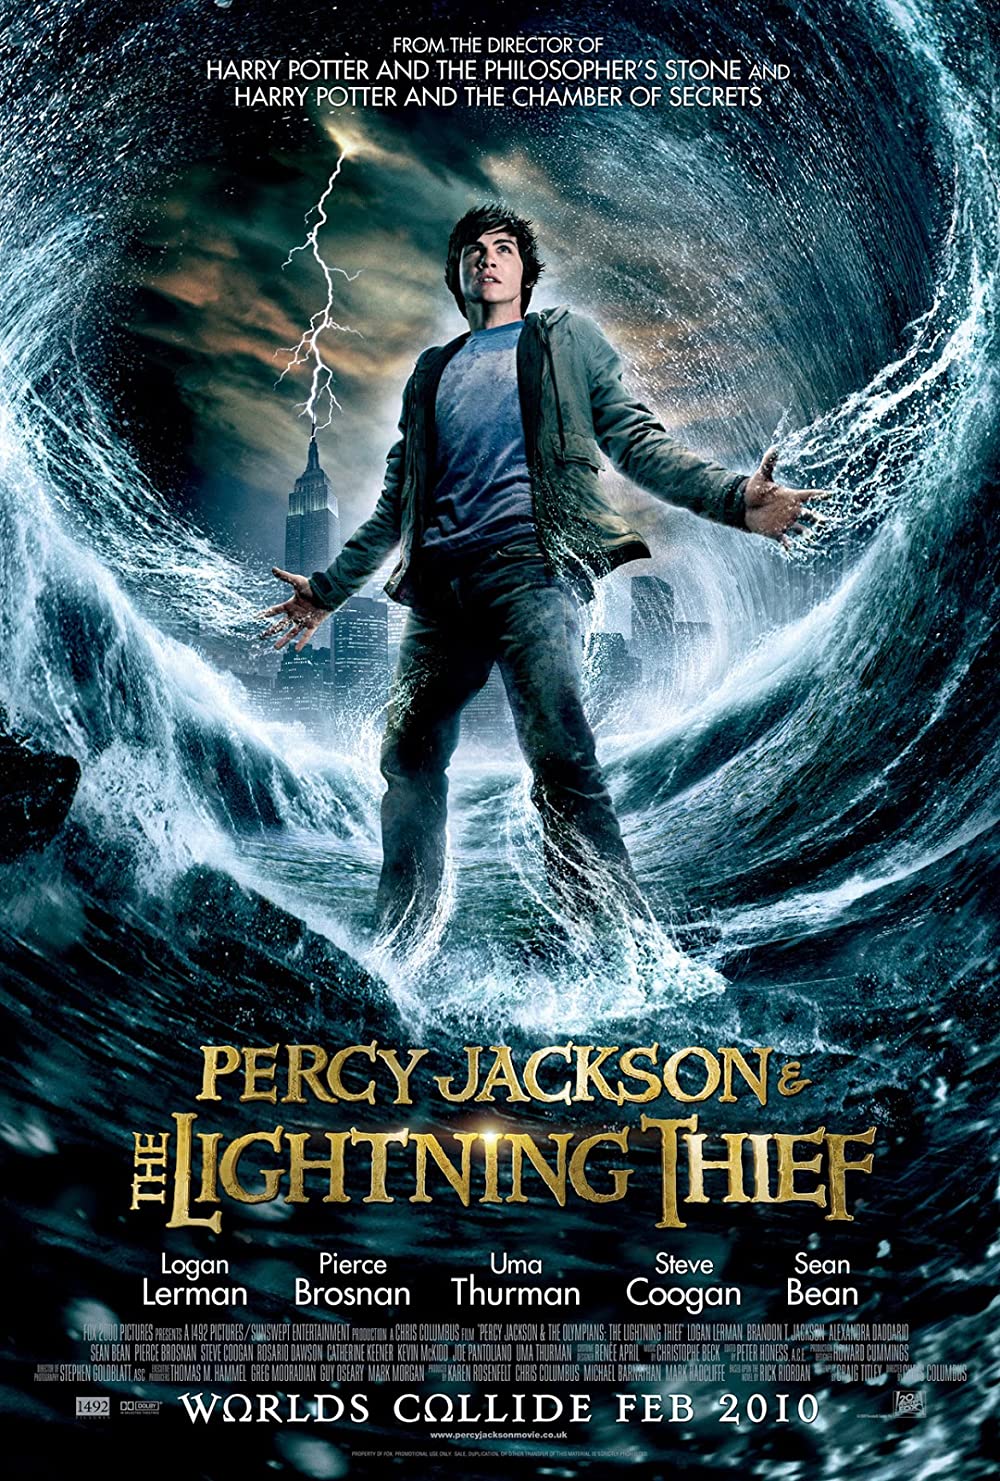 percy jackson and the olympians the lightning thief 2010 - From The Director Of Harry Potter And The Philosopher'S Stone And Harry Potter And The Chamber Of Secrets Percy Jacksone Flightning Thief Brosnan Thurman Coogan Bean Logan Pierce Uma Steve Sean Le